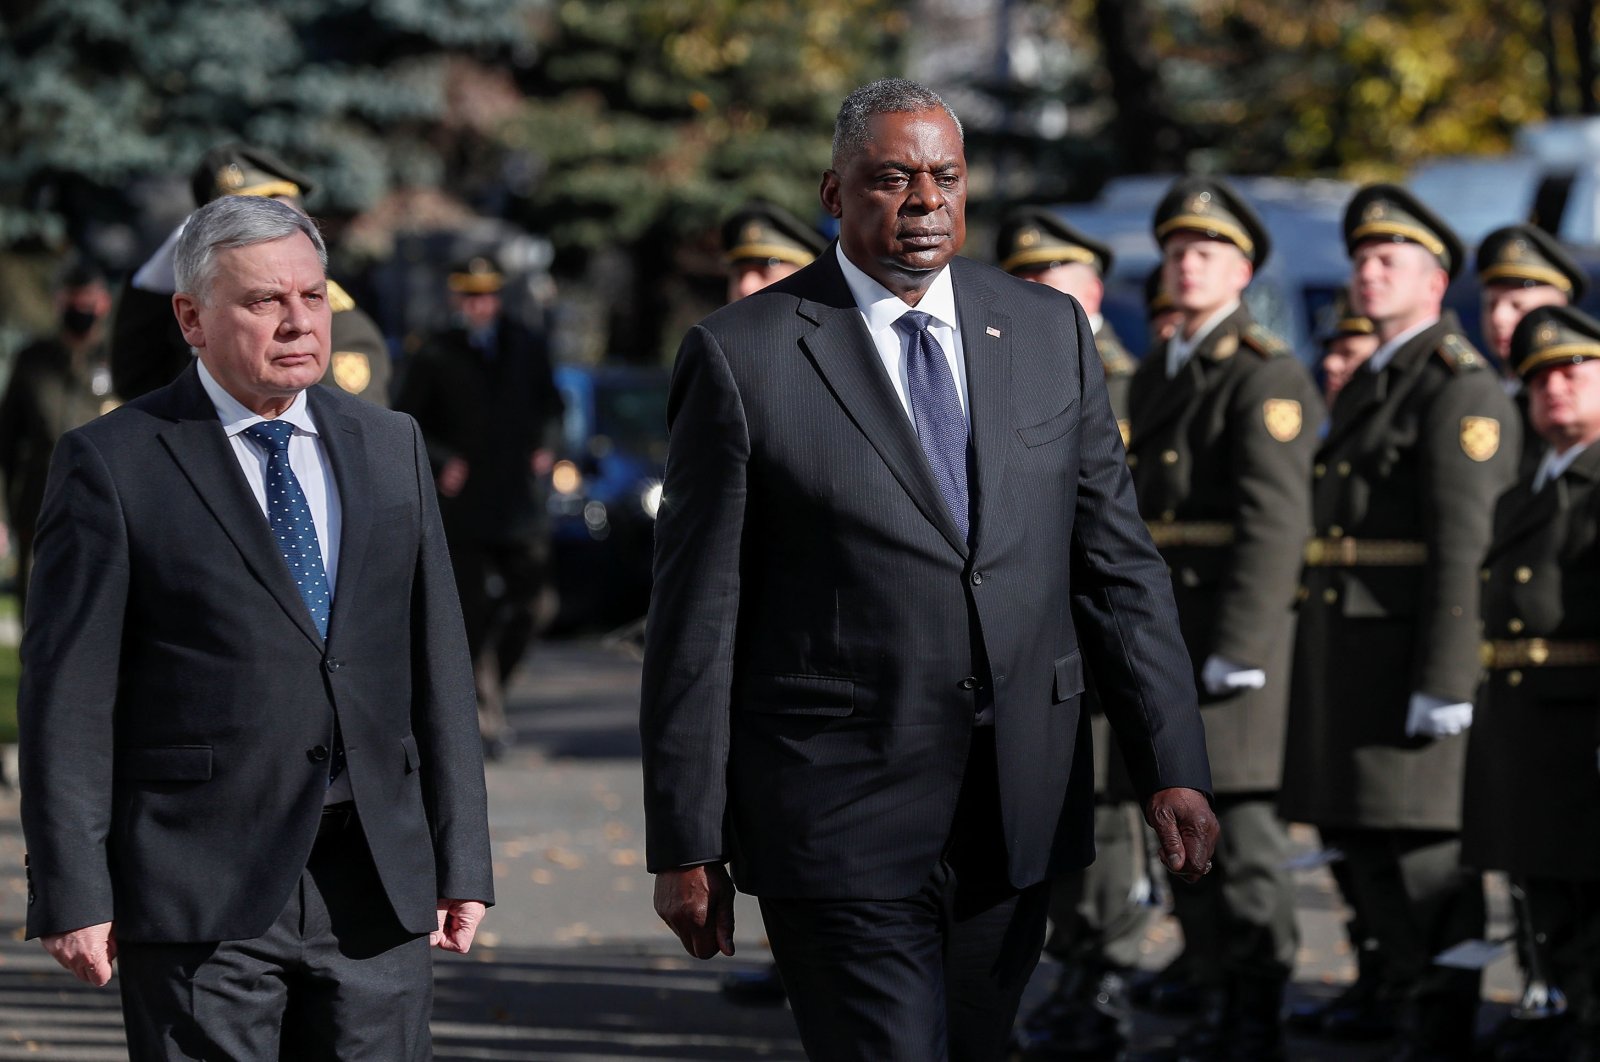 U.S. Defense Secretary Lloyd Austin and Ukrainian Defense Minister Andriy Taran walk past honor guards during a welcoming ceremony prior to their meeting in Kyiv, Ukraine, Oct. 19, 2021. (Reuters Photo)